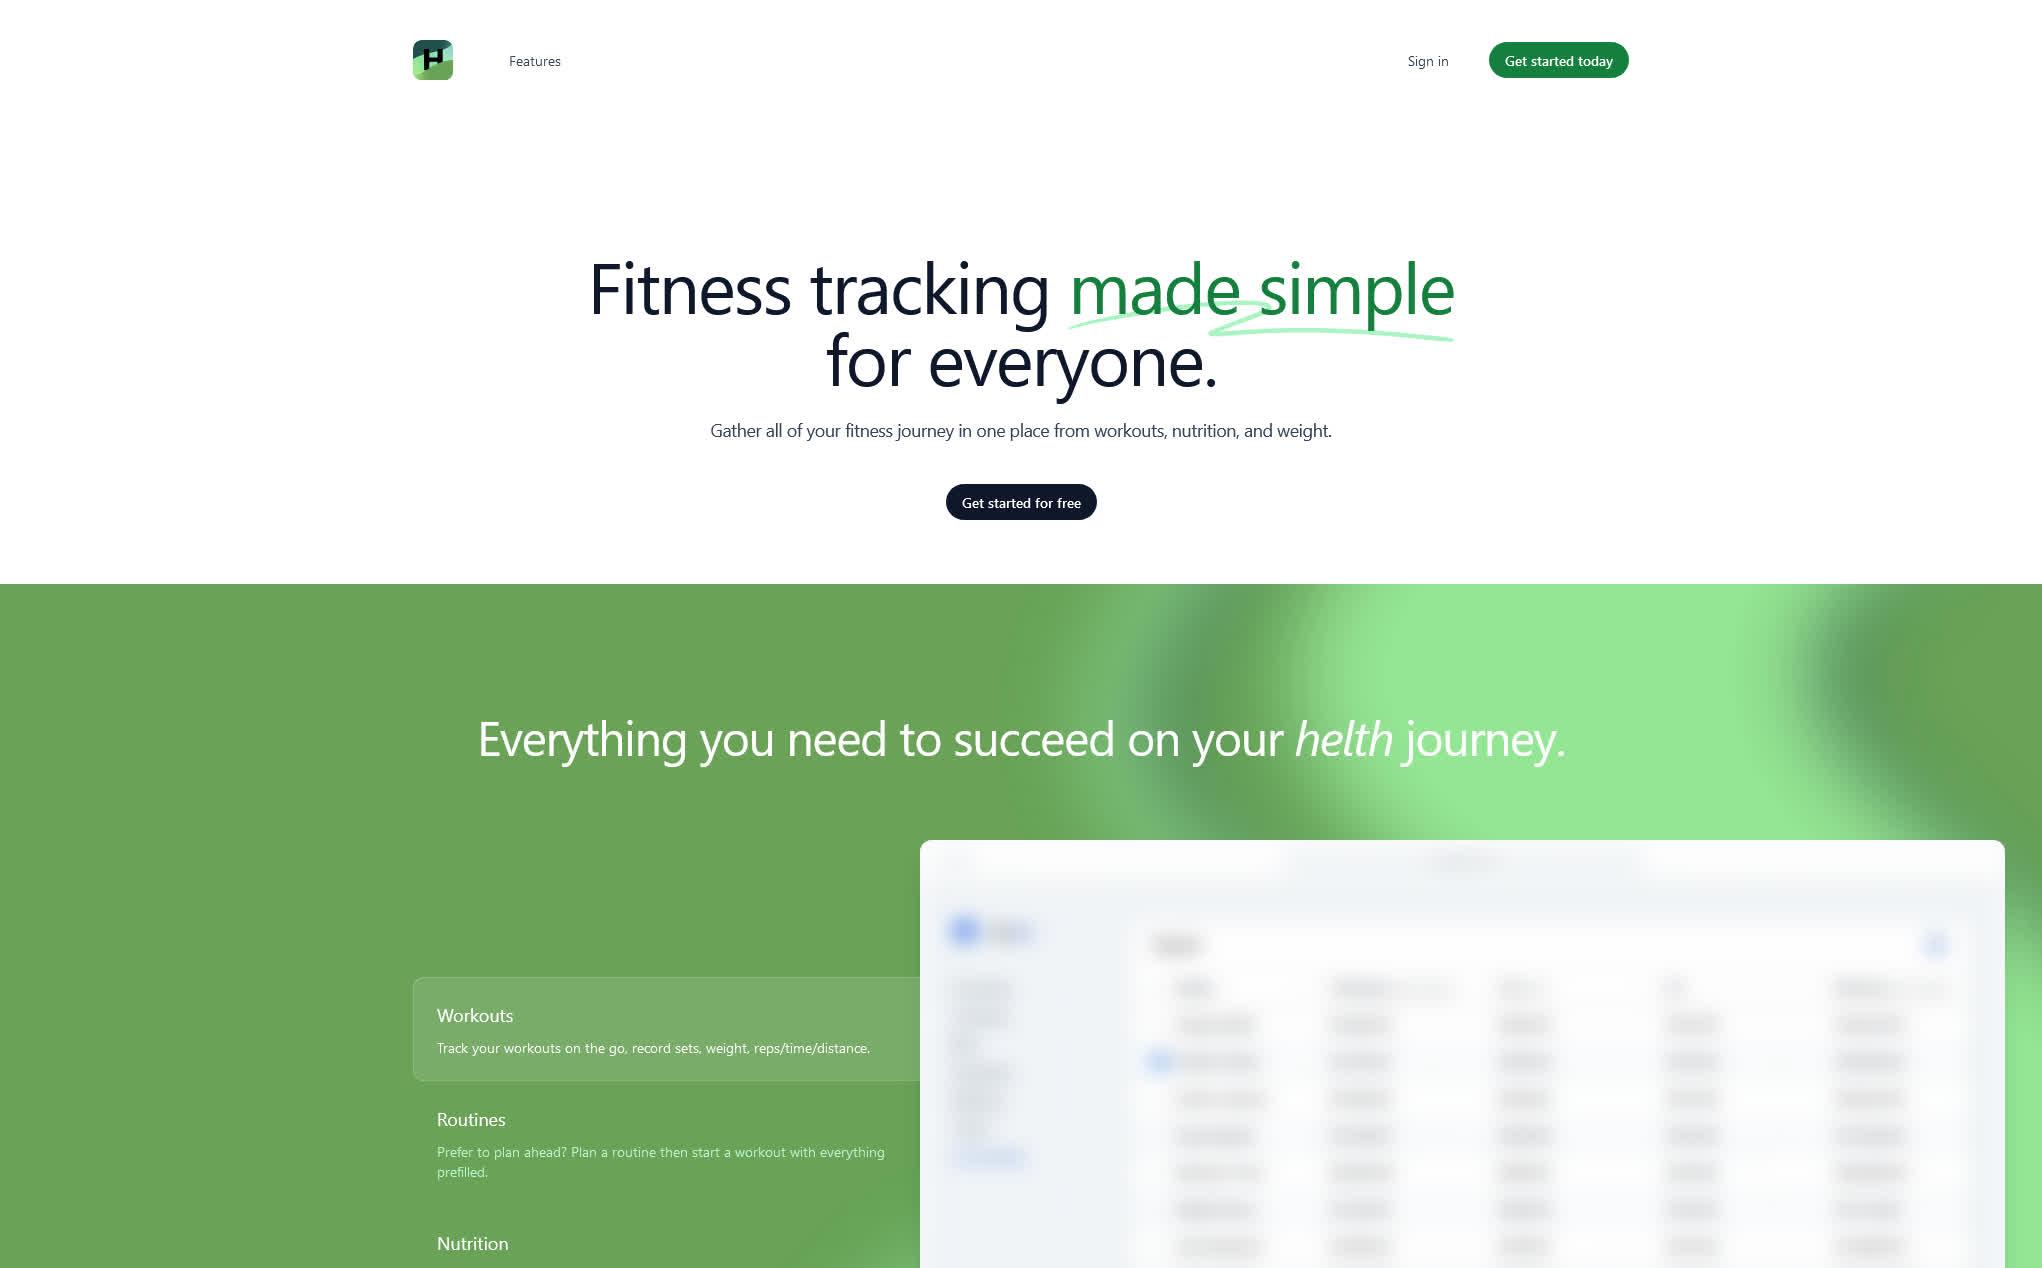 The landing page for helth.lol showing a logo and slogan 'Fitness tracking made simple for everyone'